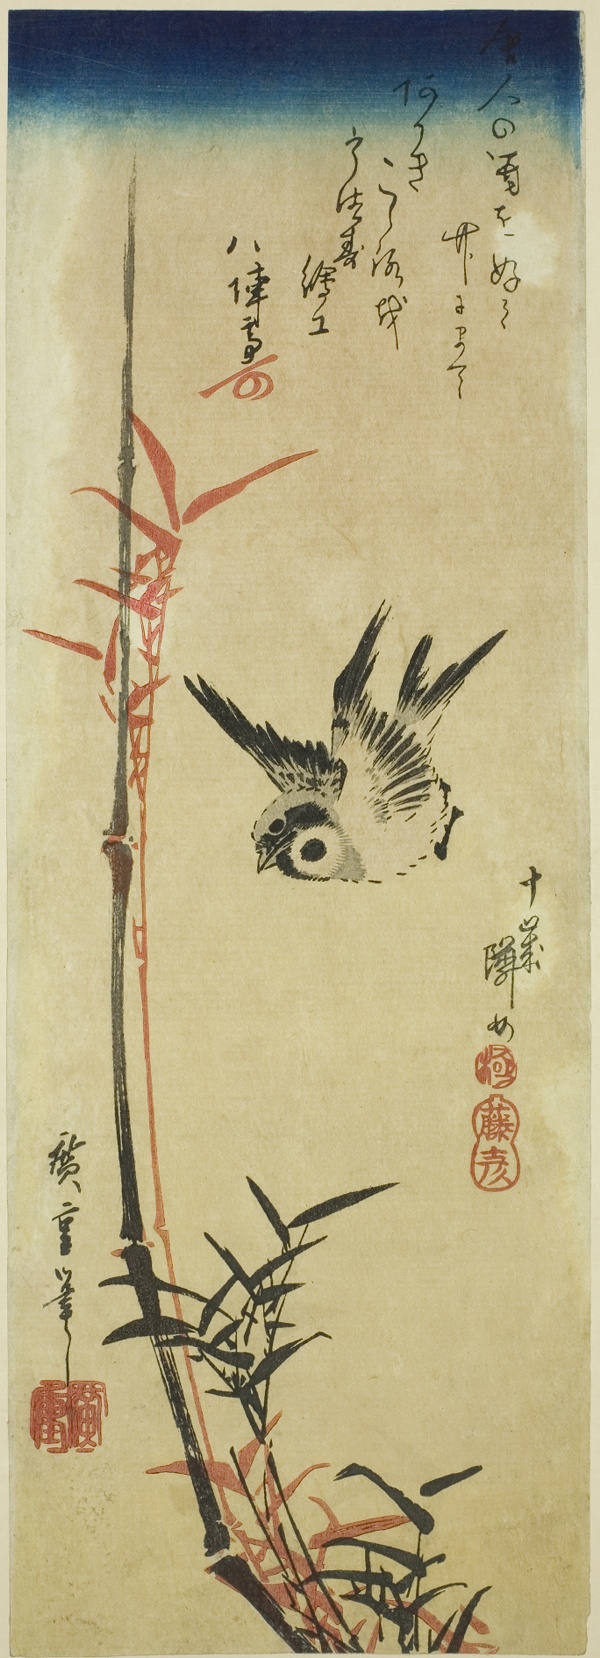 Sparrow and bamboo